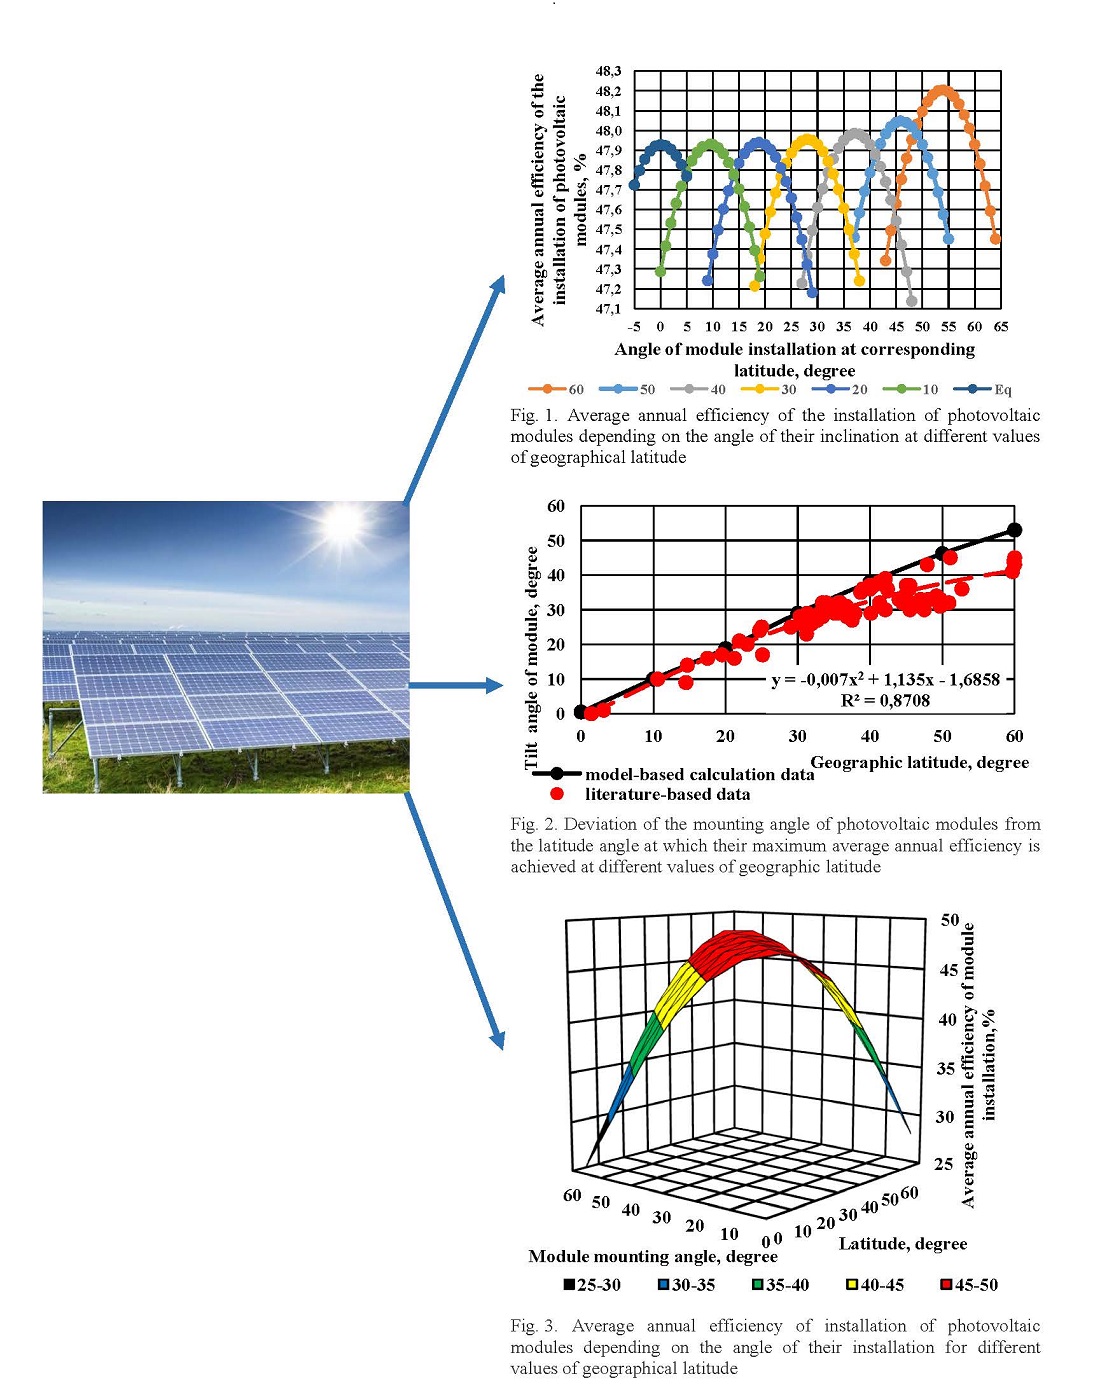 Determining the influence of mounting angle on the average annual efficiency of fixed solar photovoltaic modules